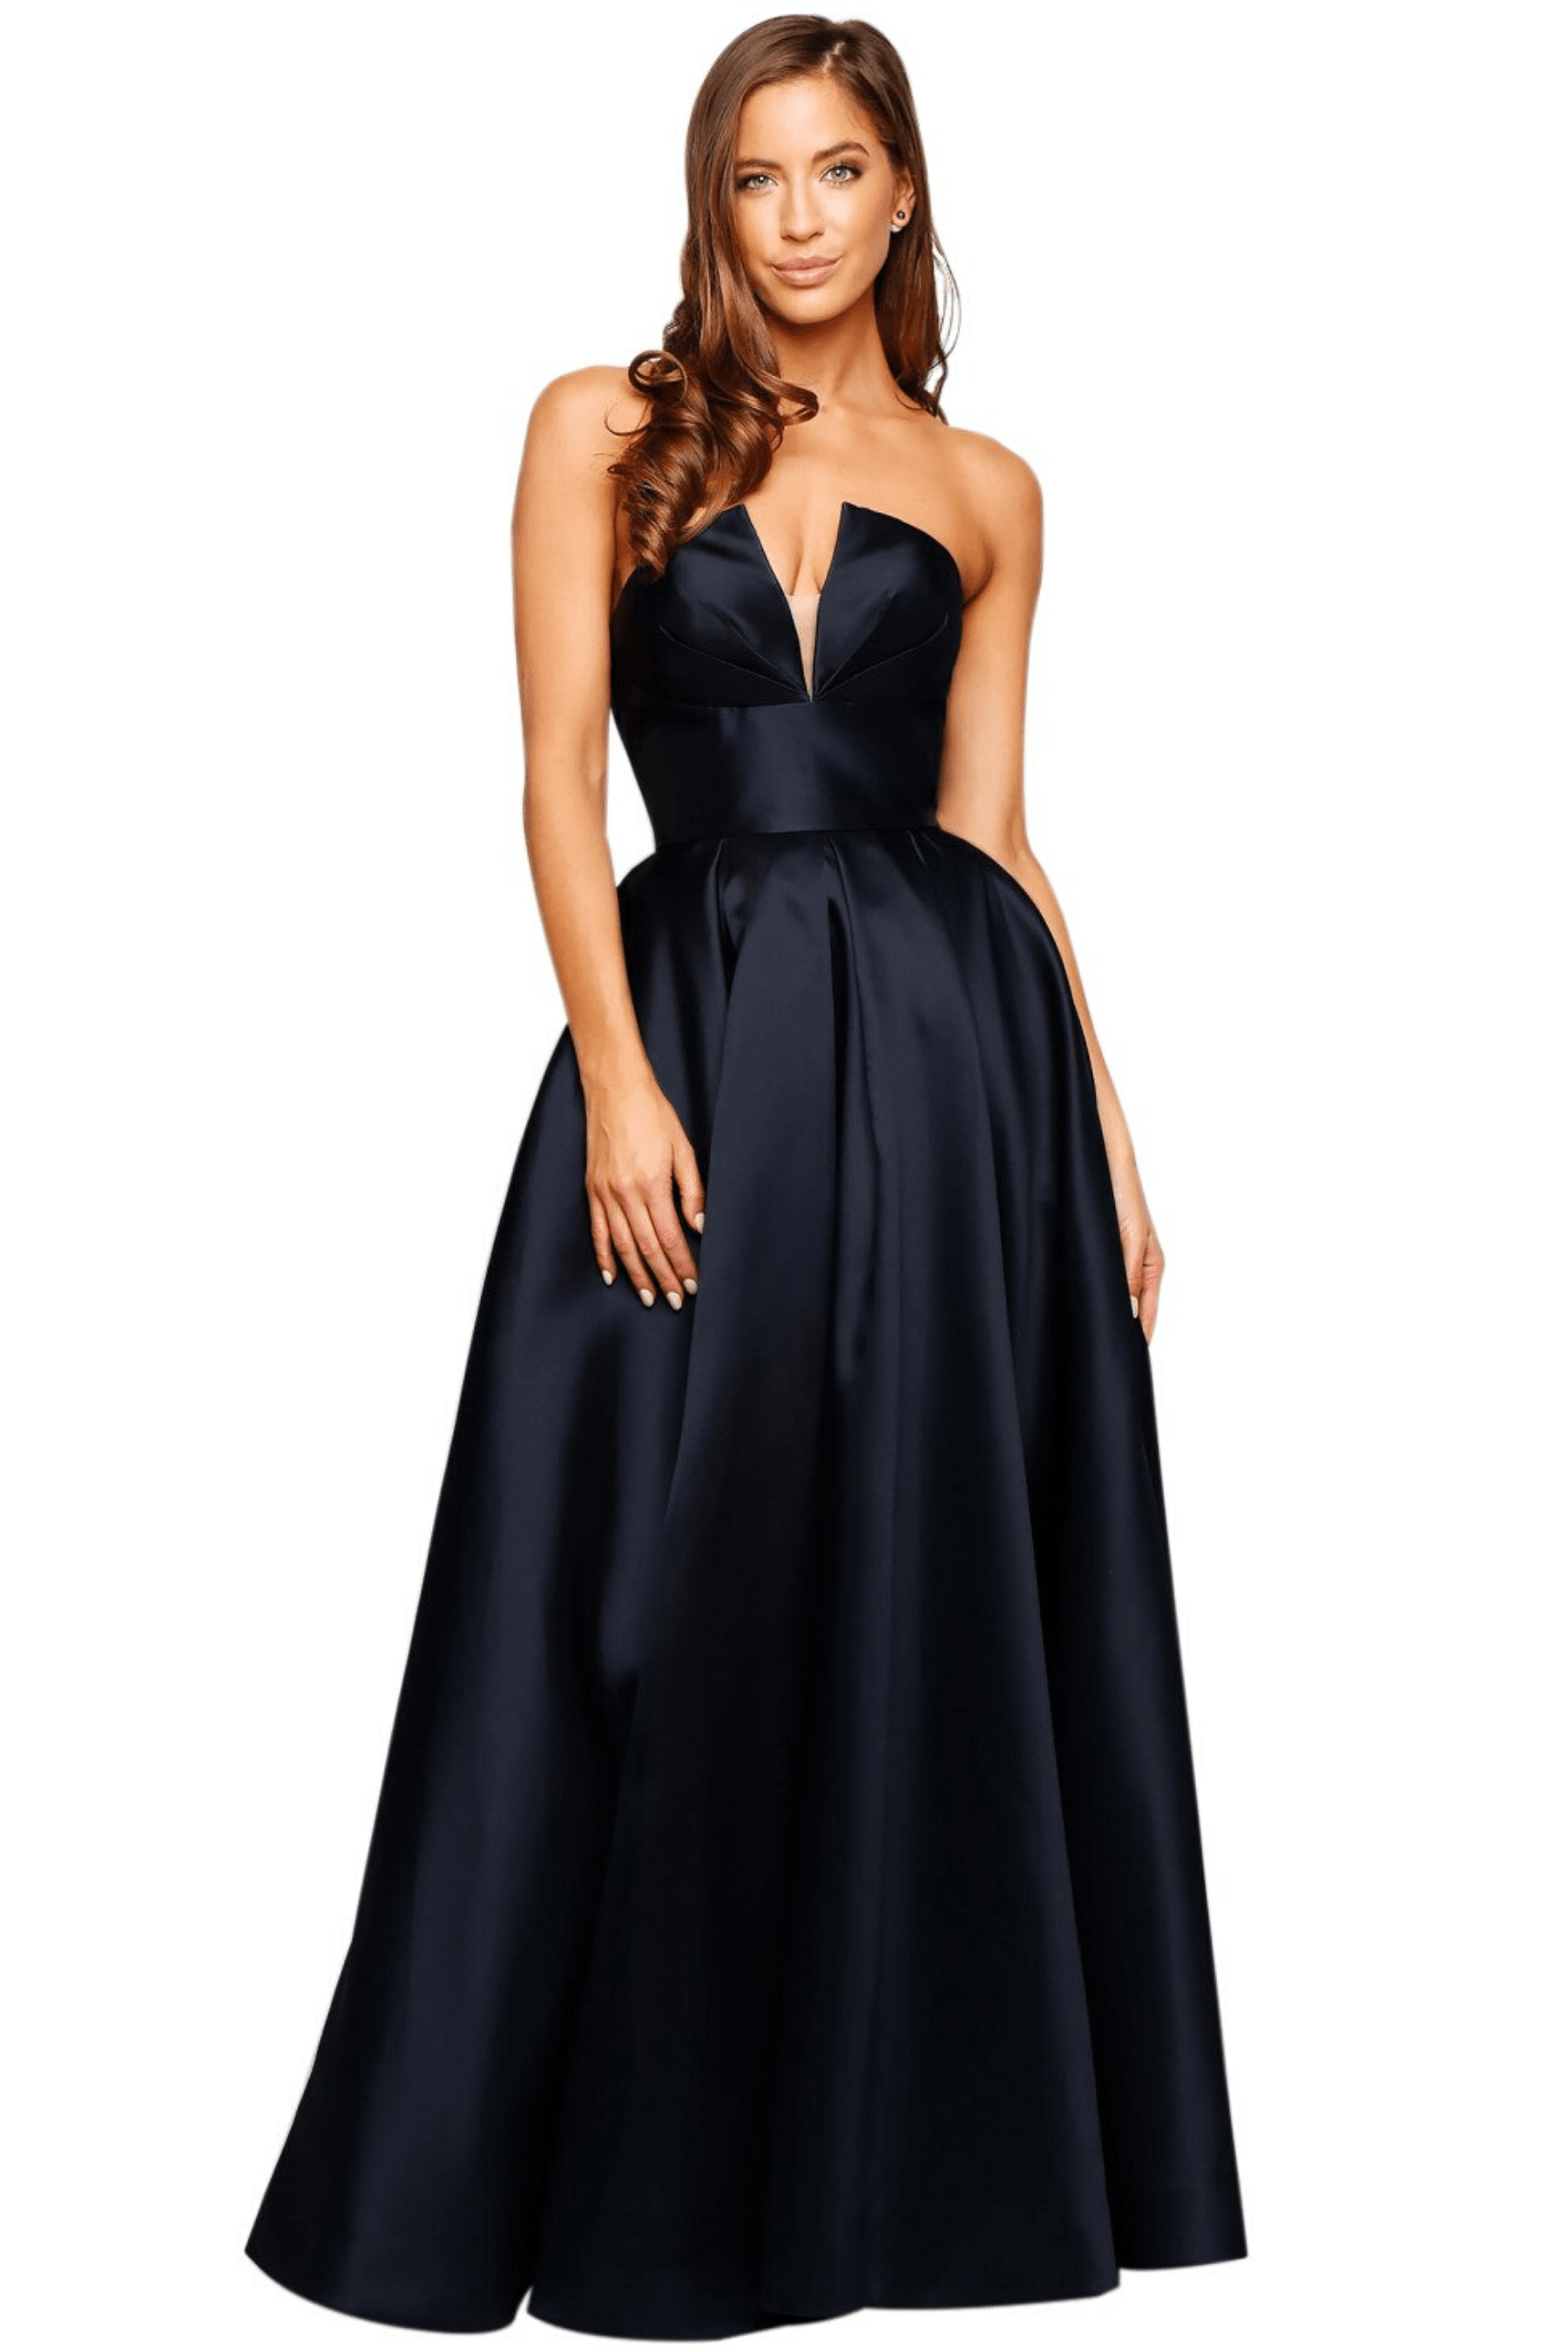 Hire Formal Dresses for Your Next Event, Dress for a Night